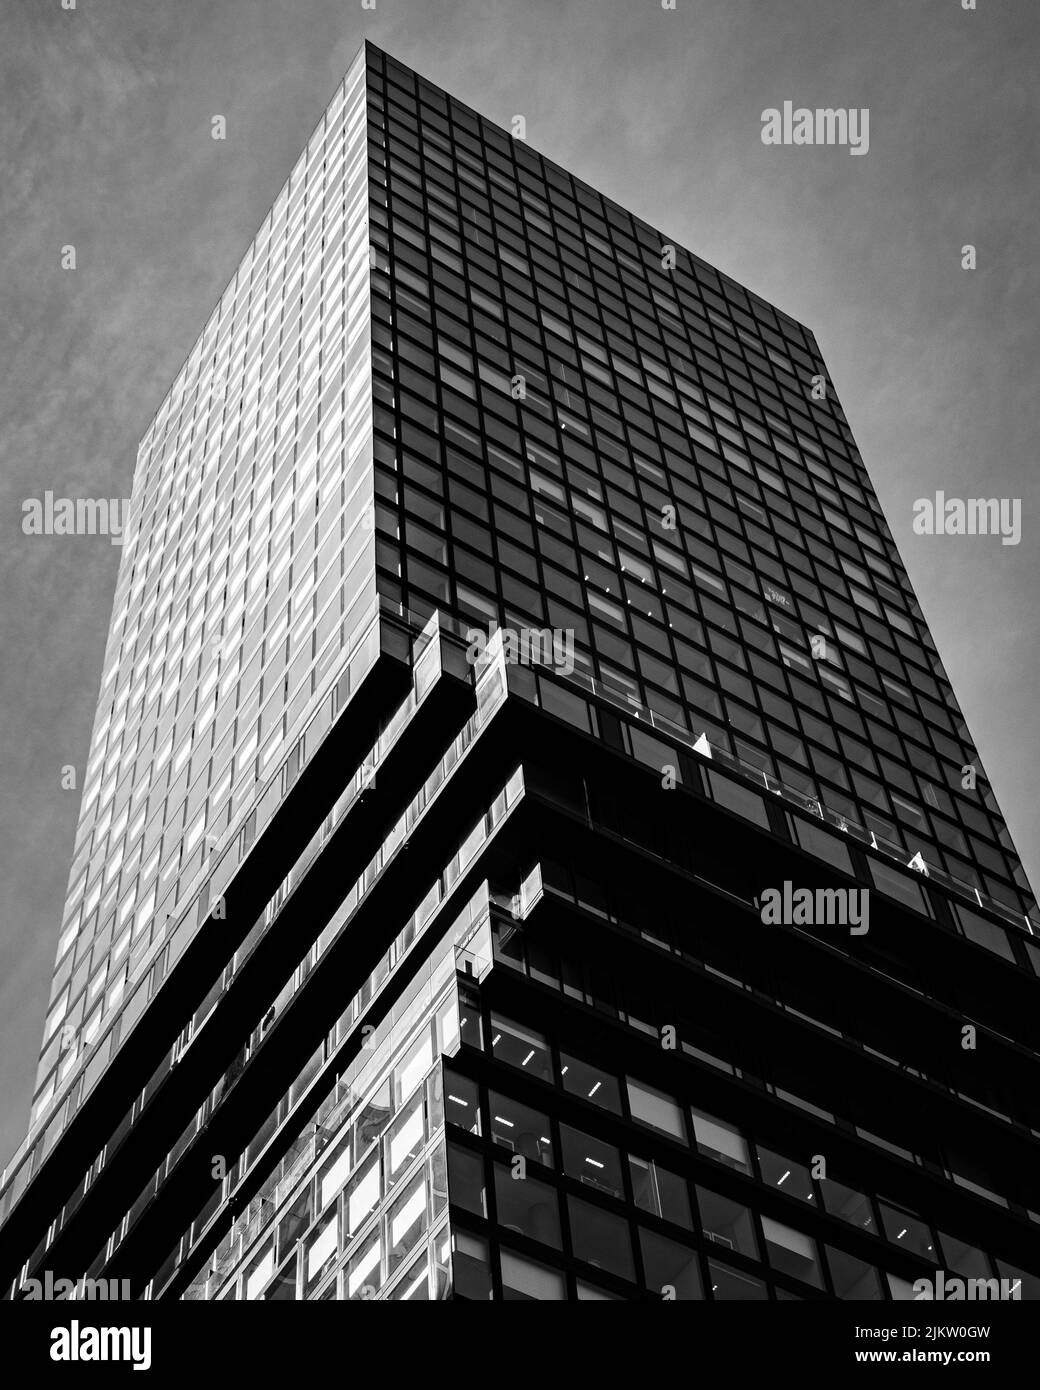 A vertical low angle grayscale view of a skyscraper with glass windows Stock Photo